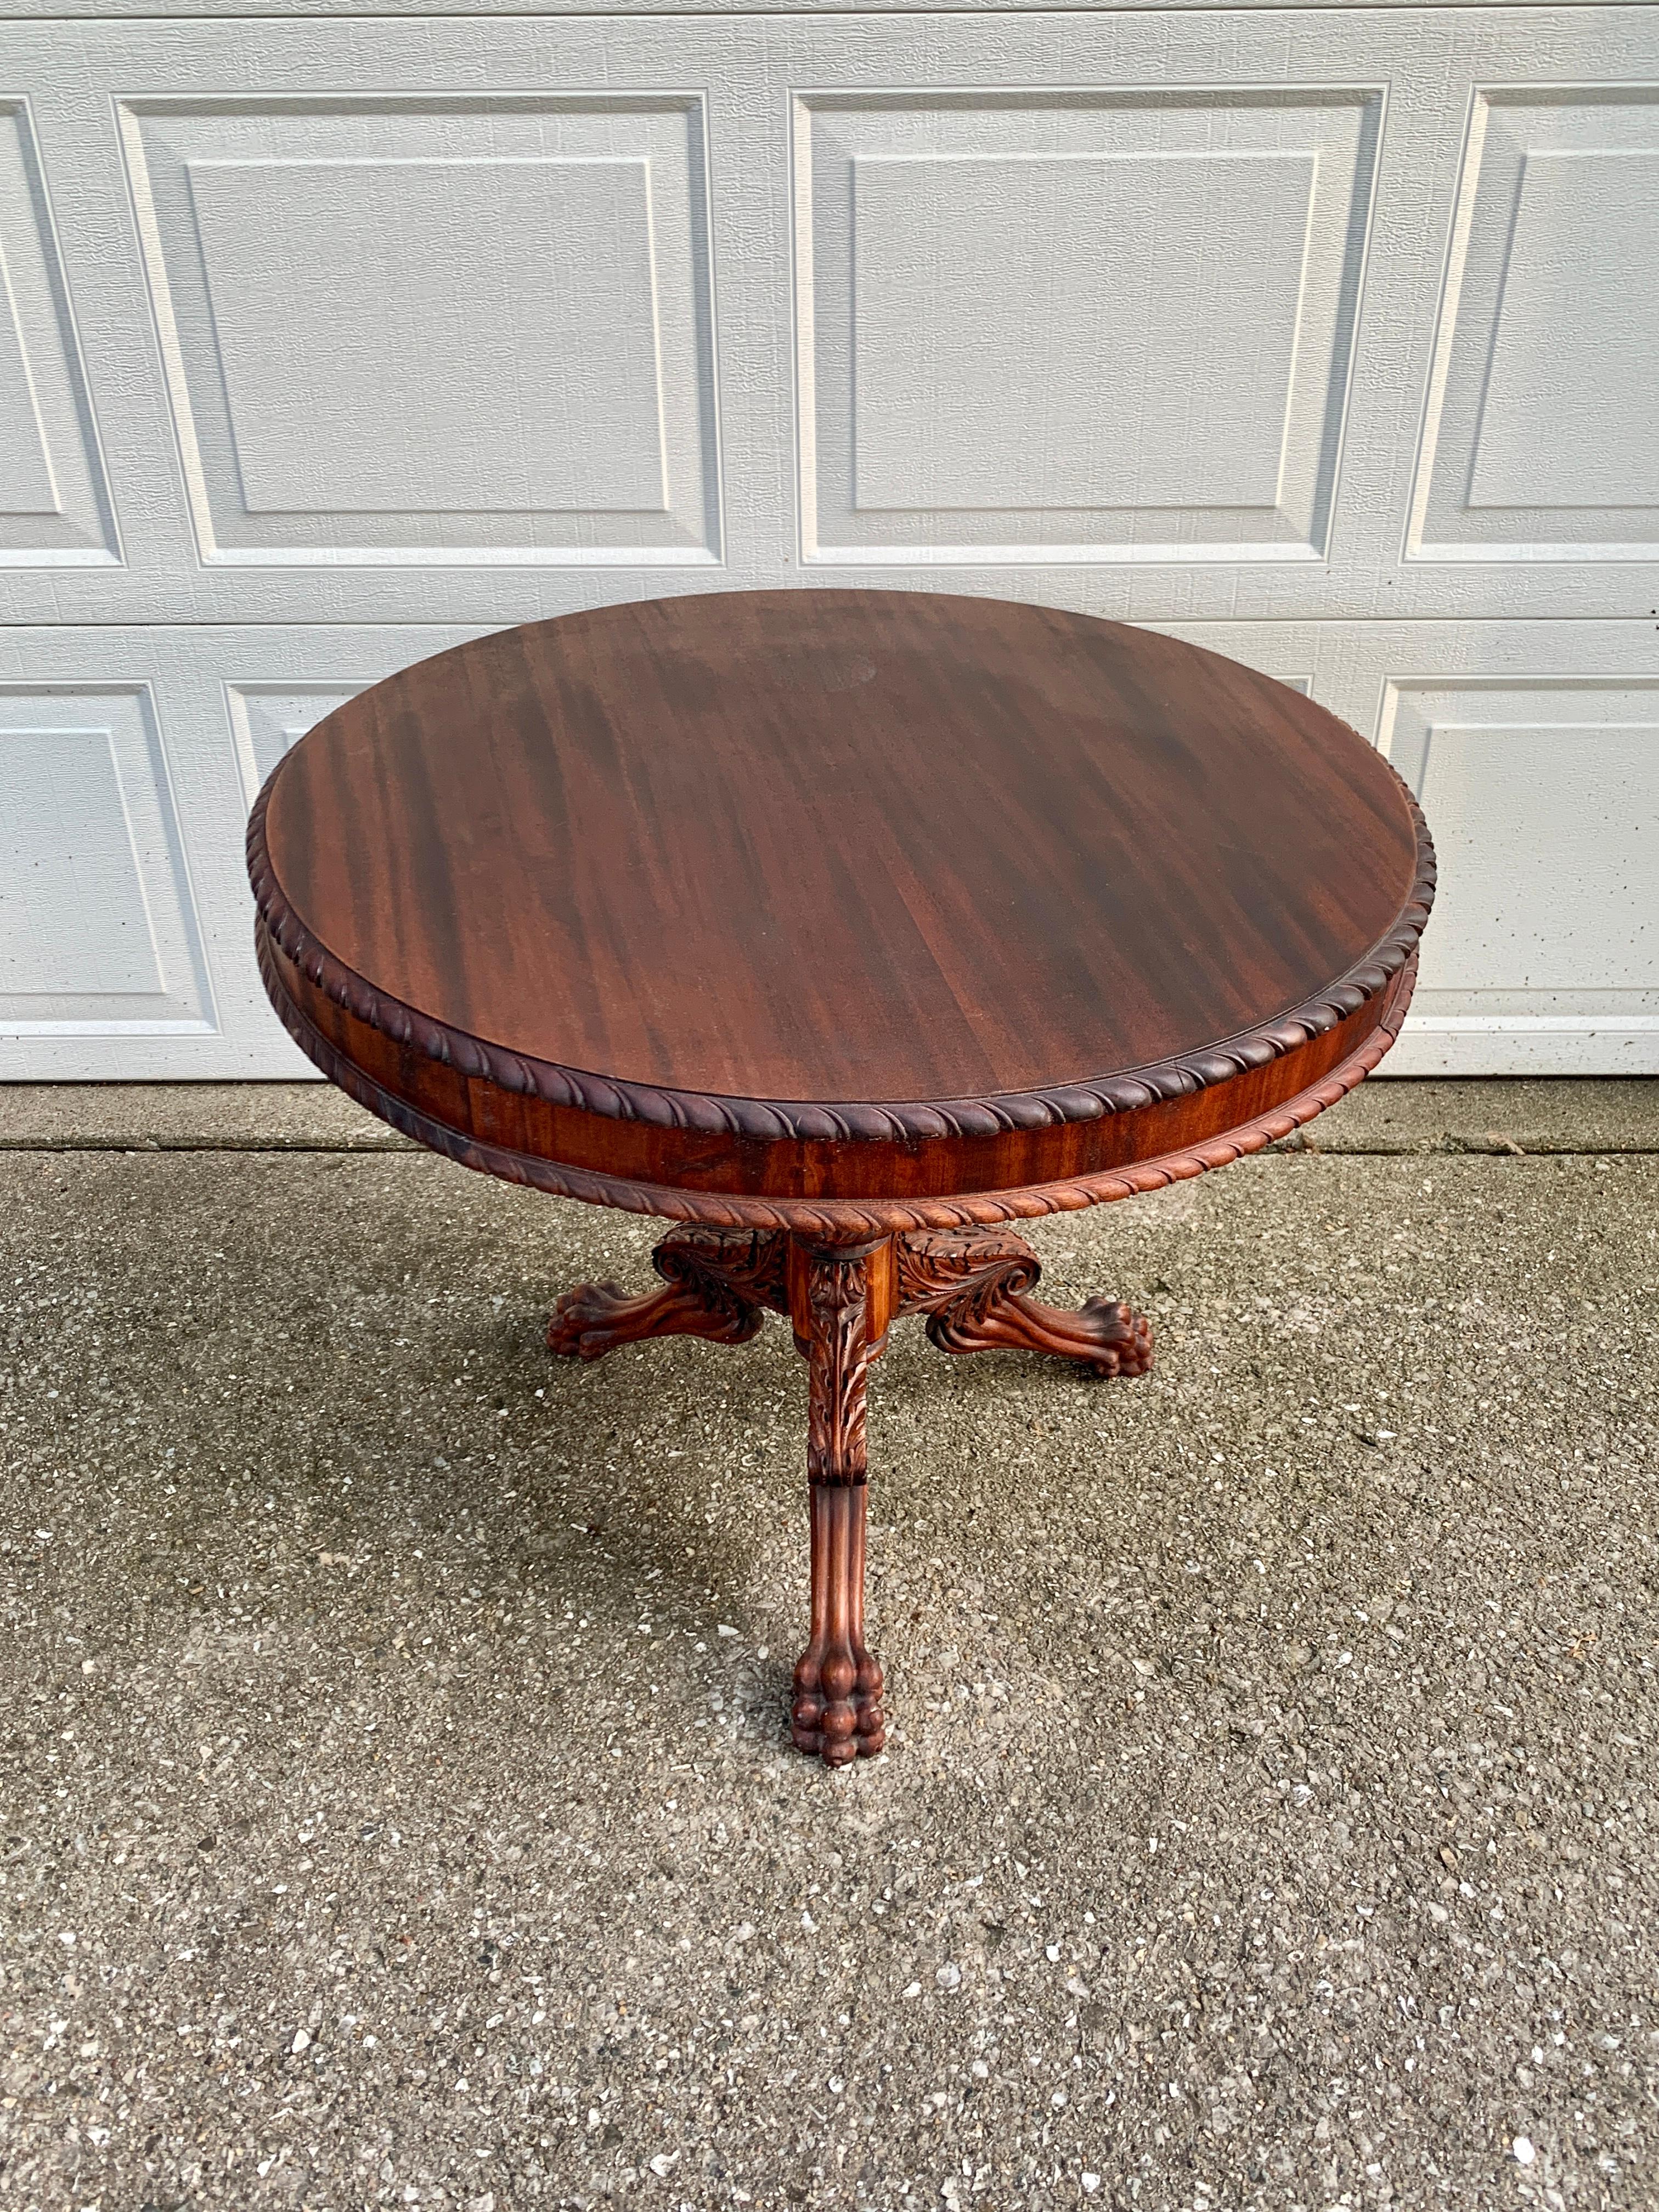 Antique American Empire Mahogany Paw Foot Pedestal Side Table, Late 19th Century For Sale 7